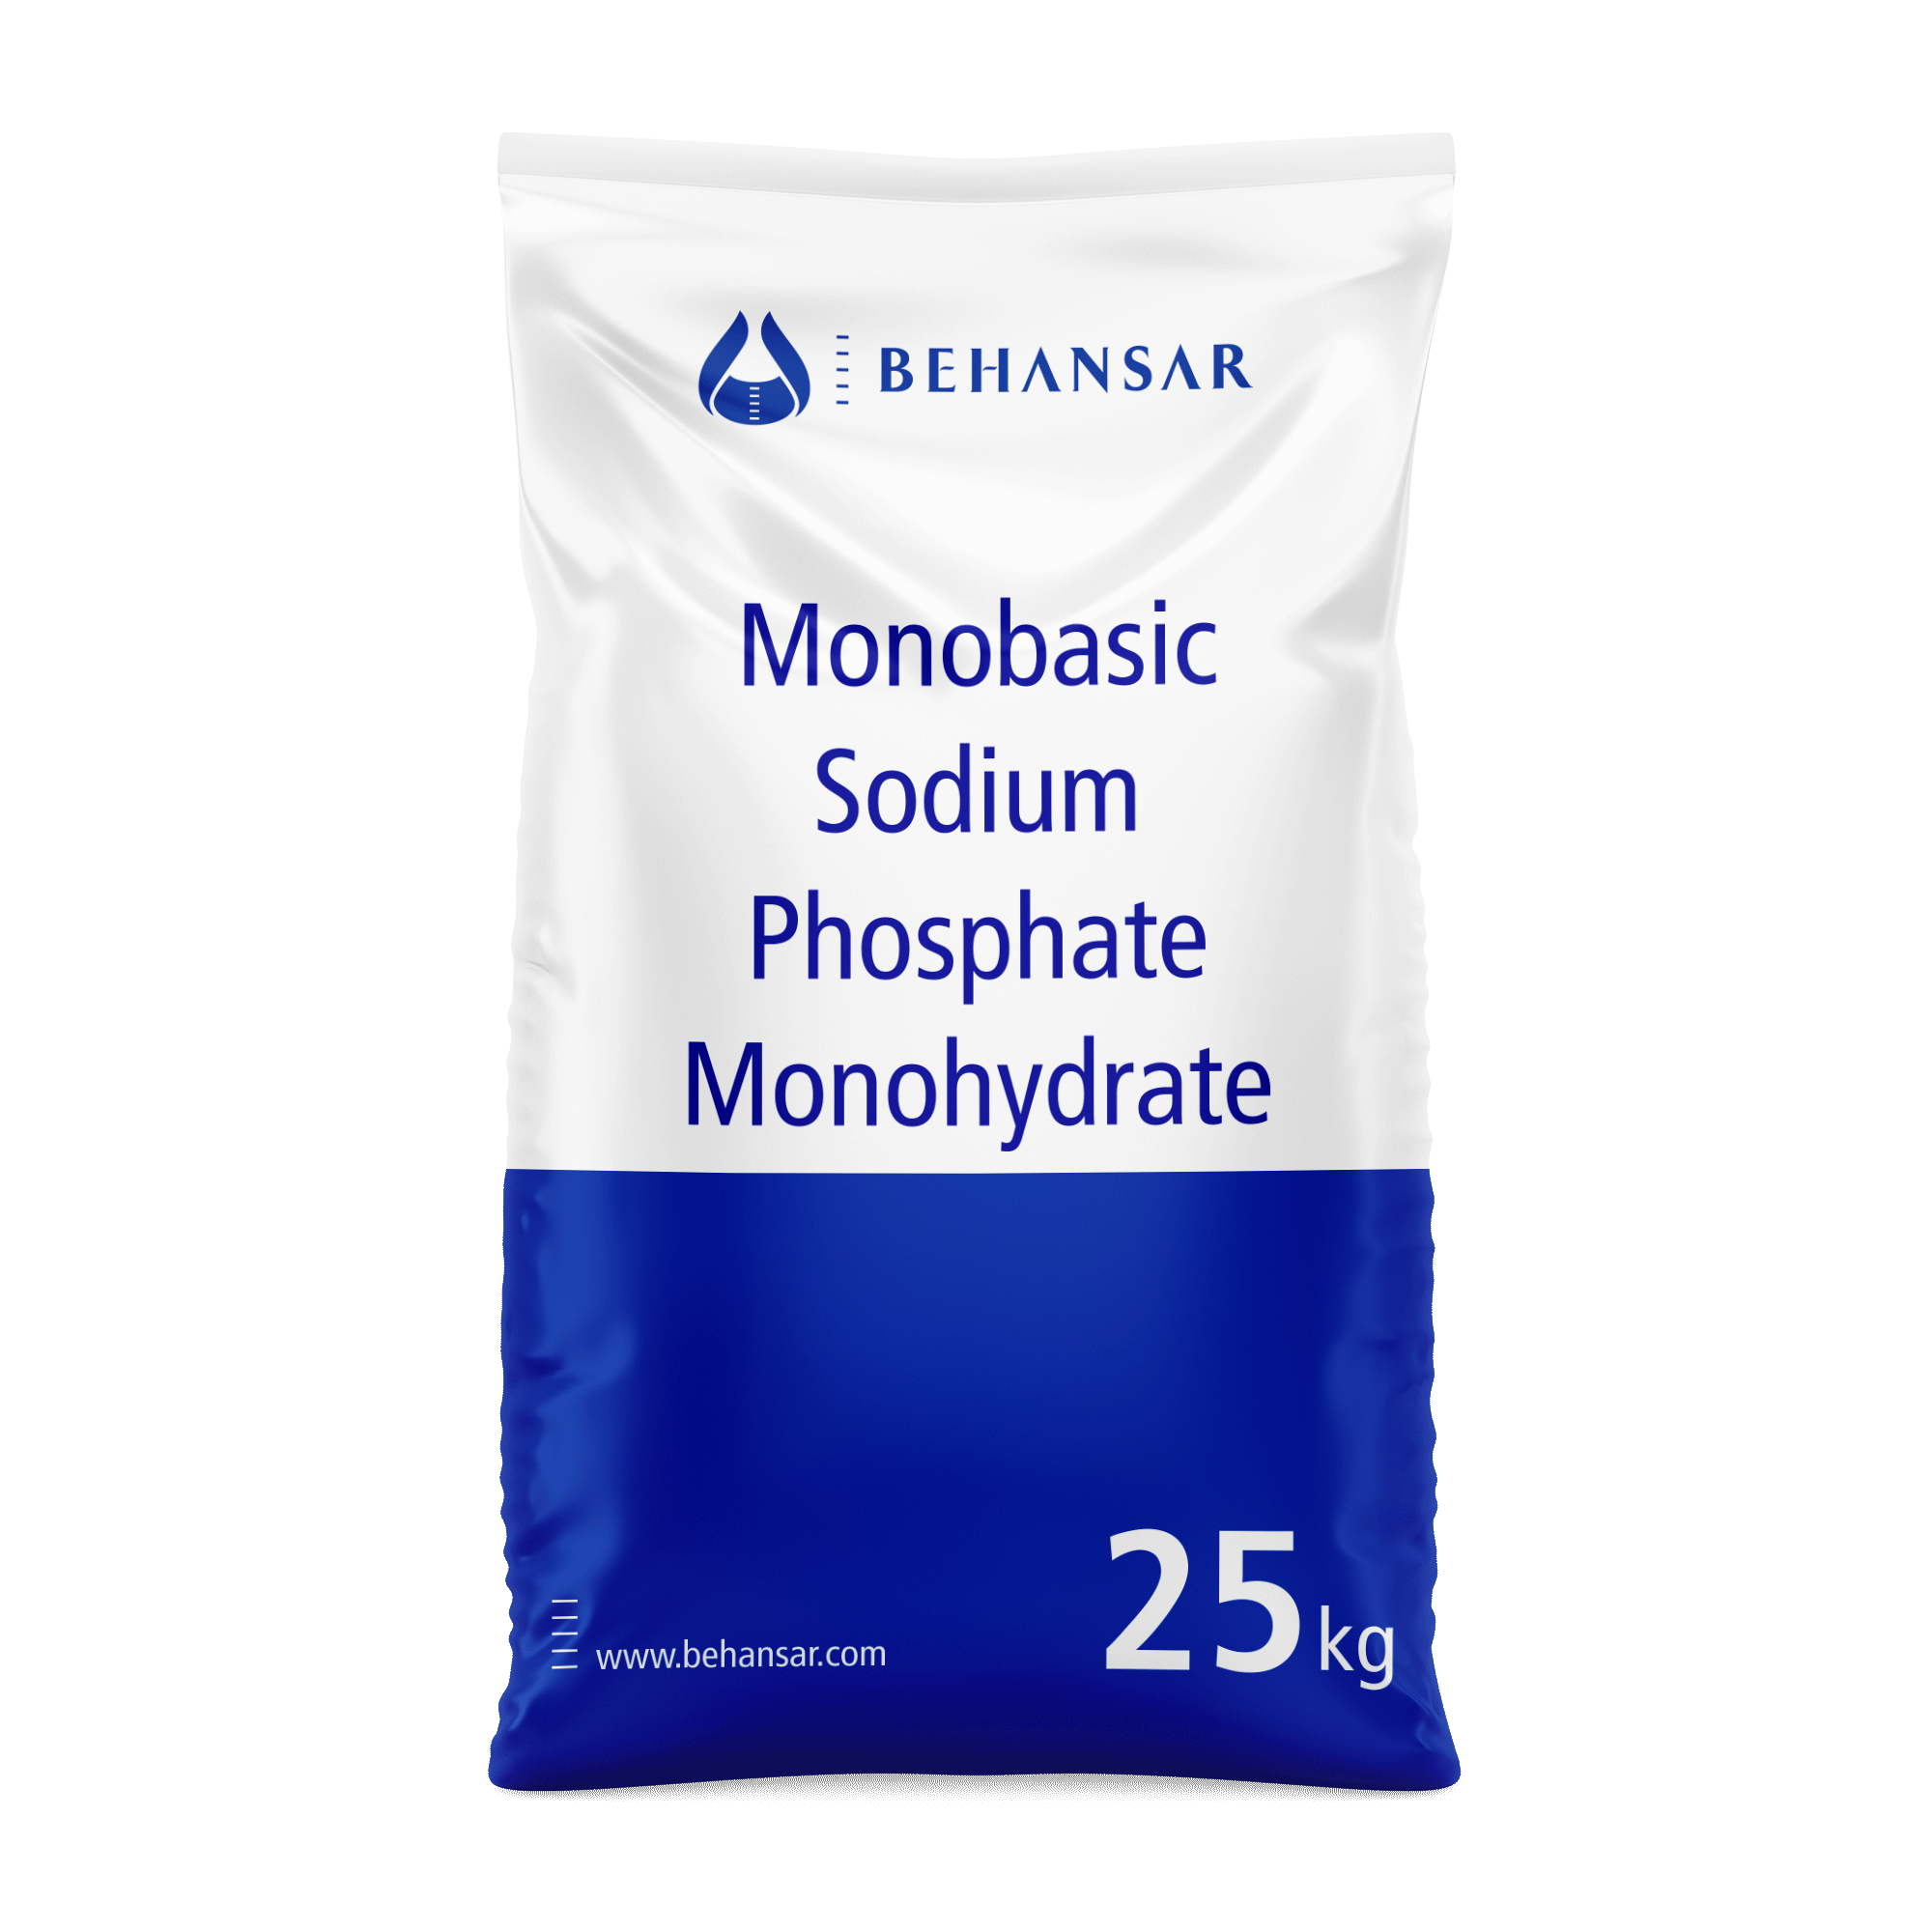 Monobasic Sodium Phosphate Monohydrate is one of the products of Behansar Co